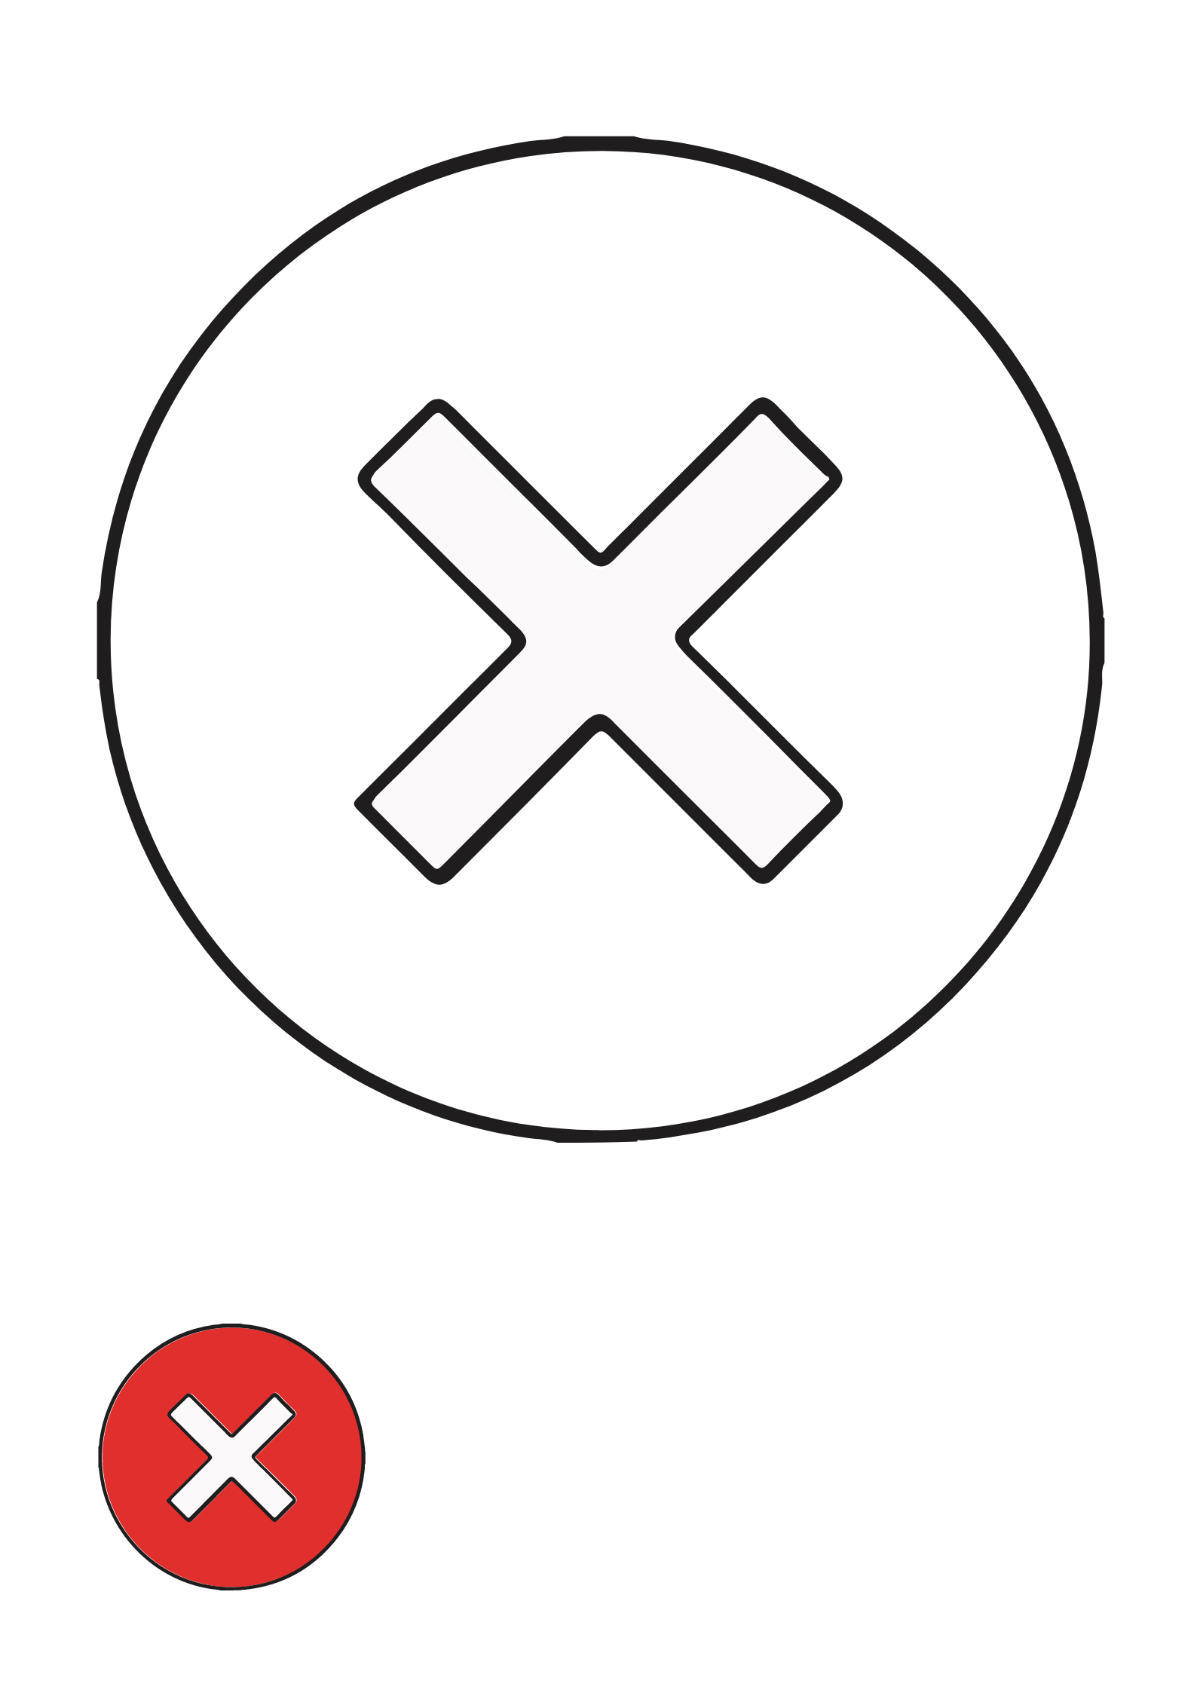 Red Cross Check Mark Coloring Page